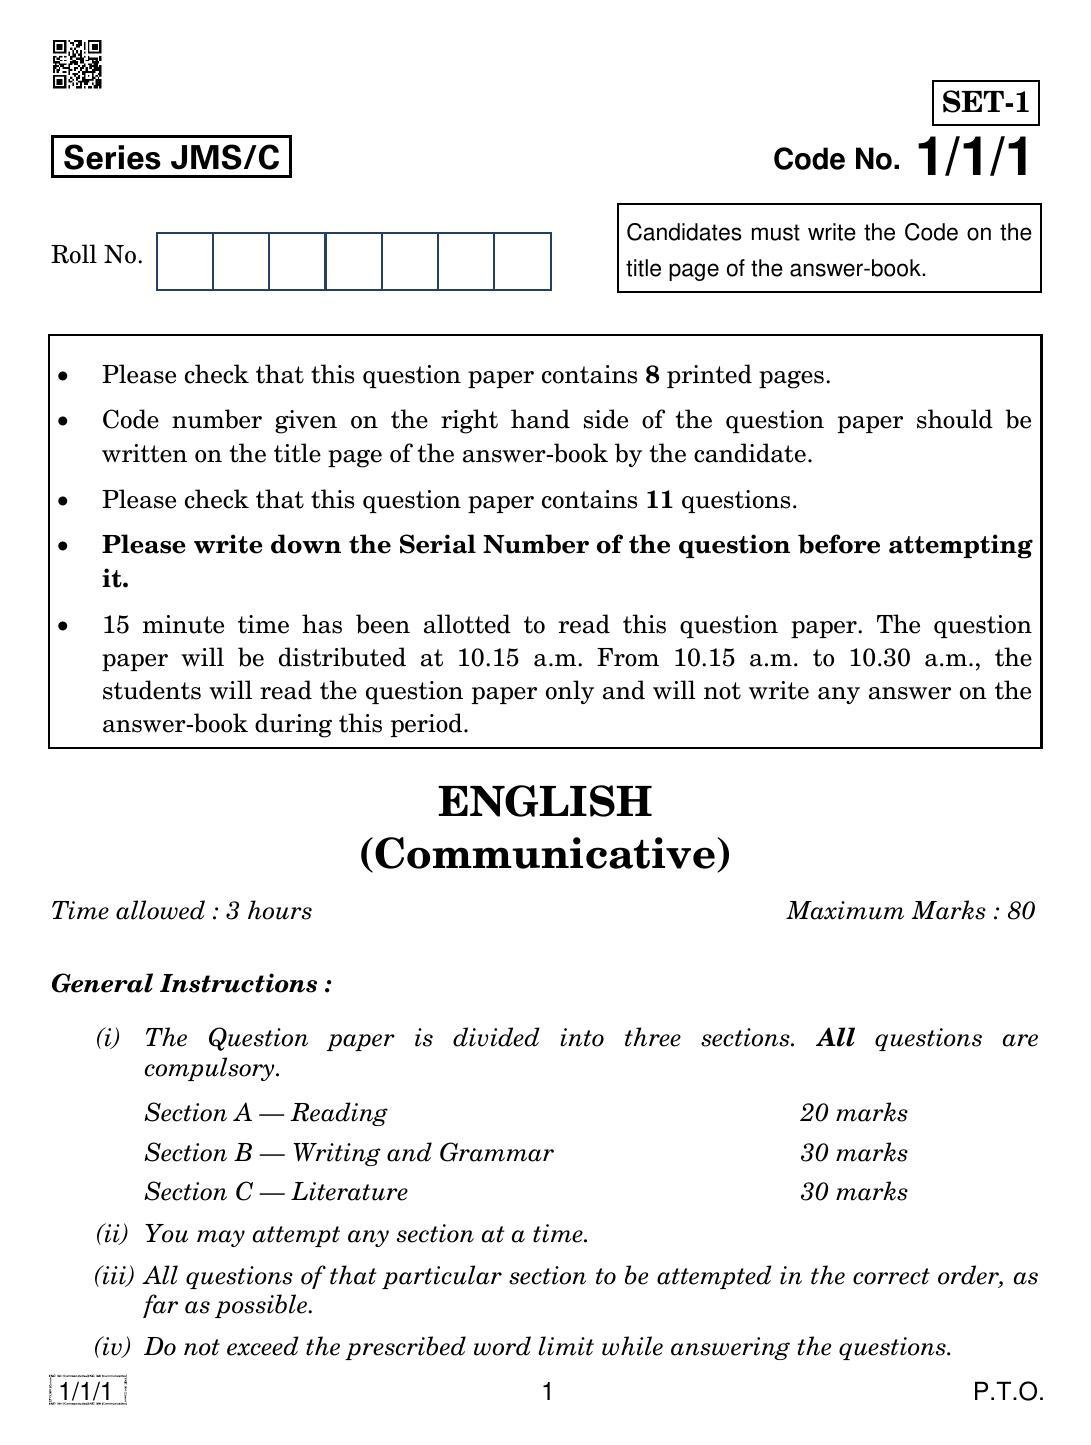 CBSE Class 10 1-1-1 ENGLISH COMM. 2019 Compartment Question Paper - Page 1